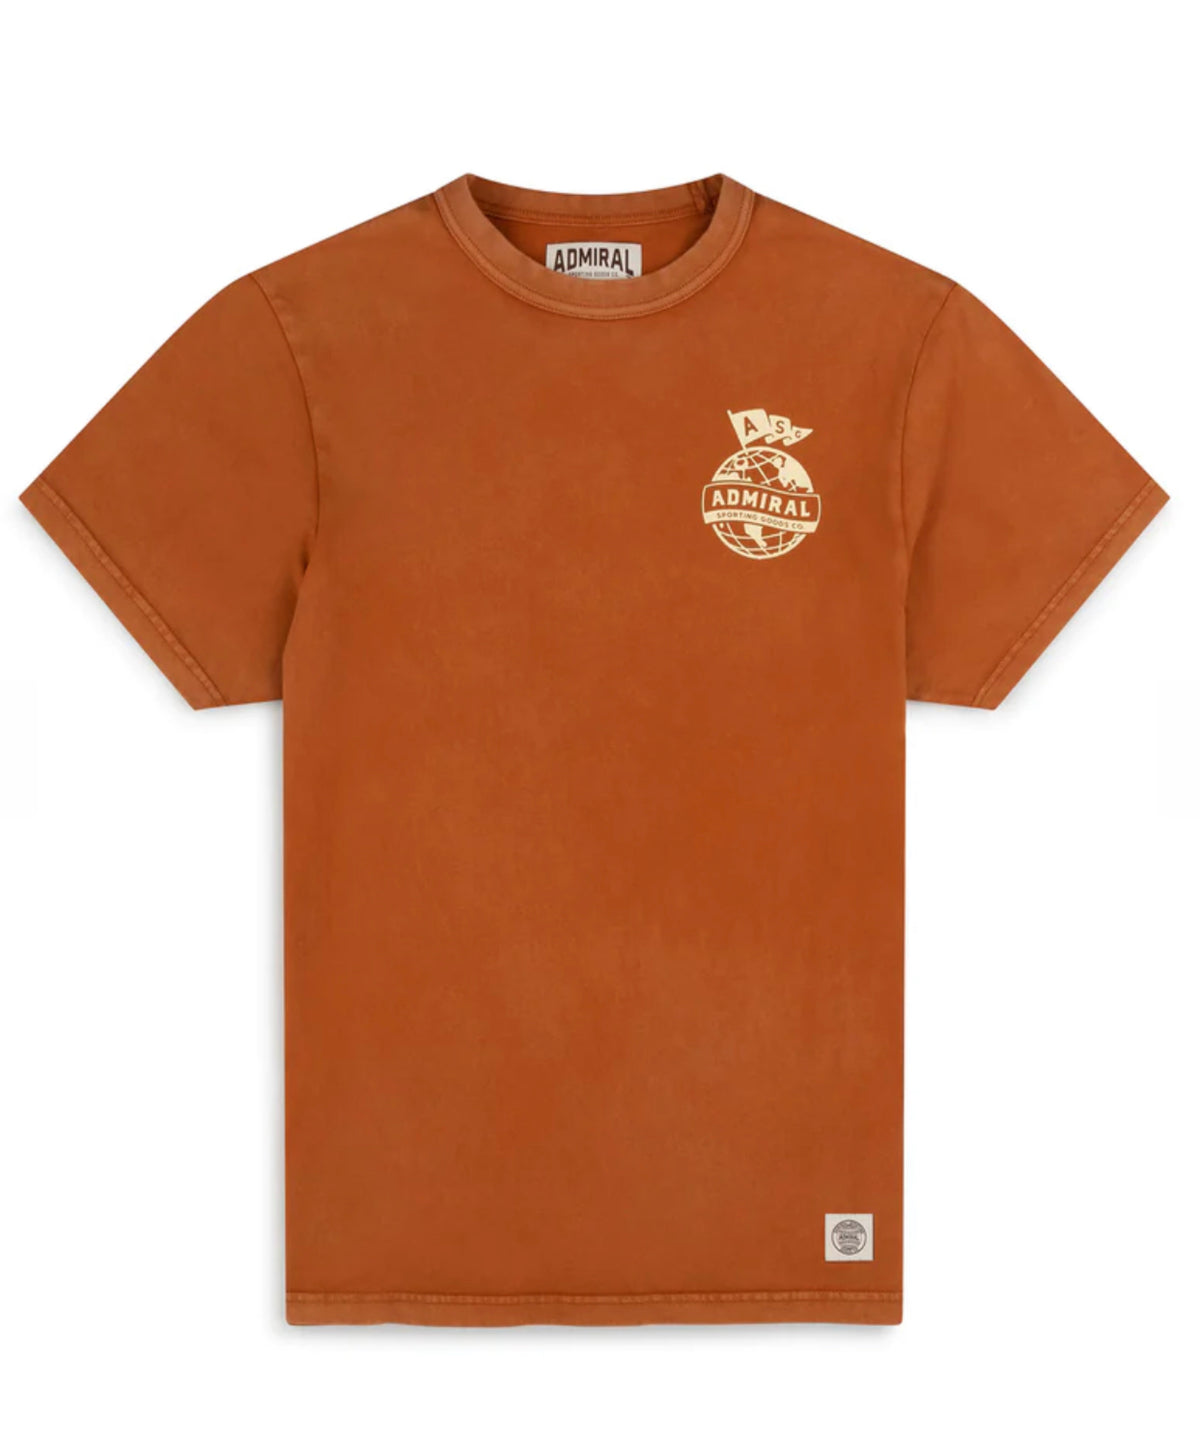 Admiral Sporting Goods Globe T-Shirt - Mexi Clay